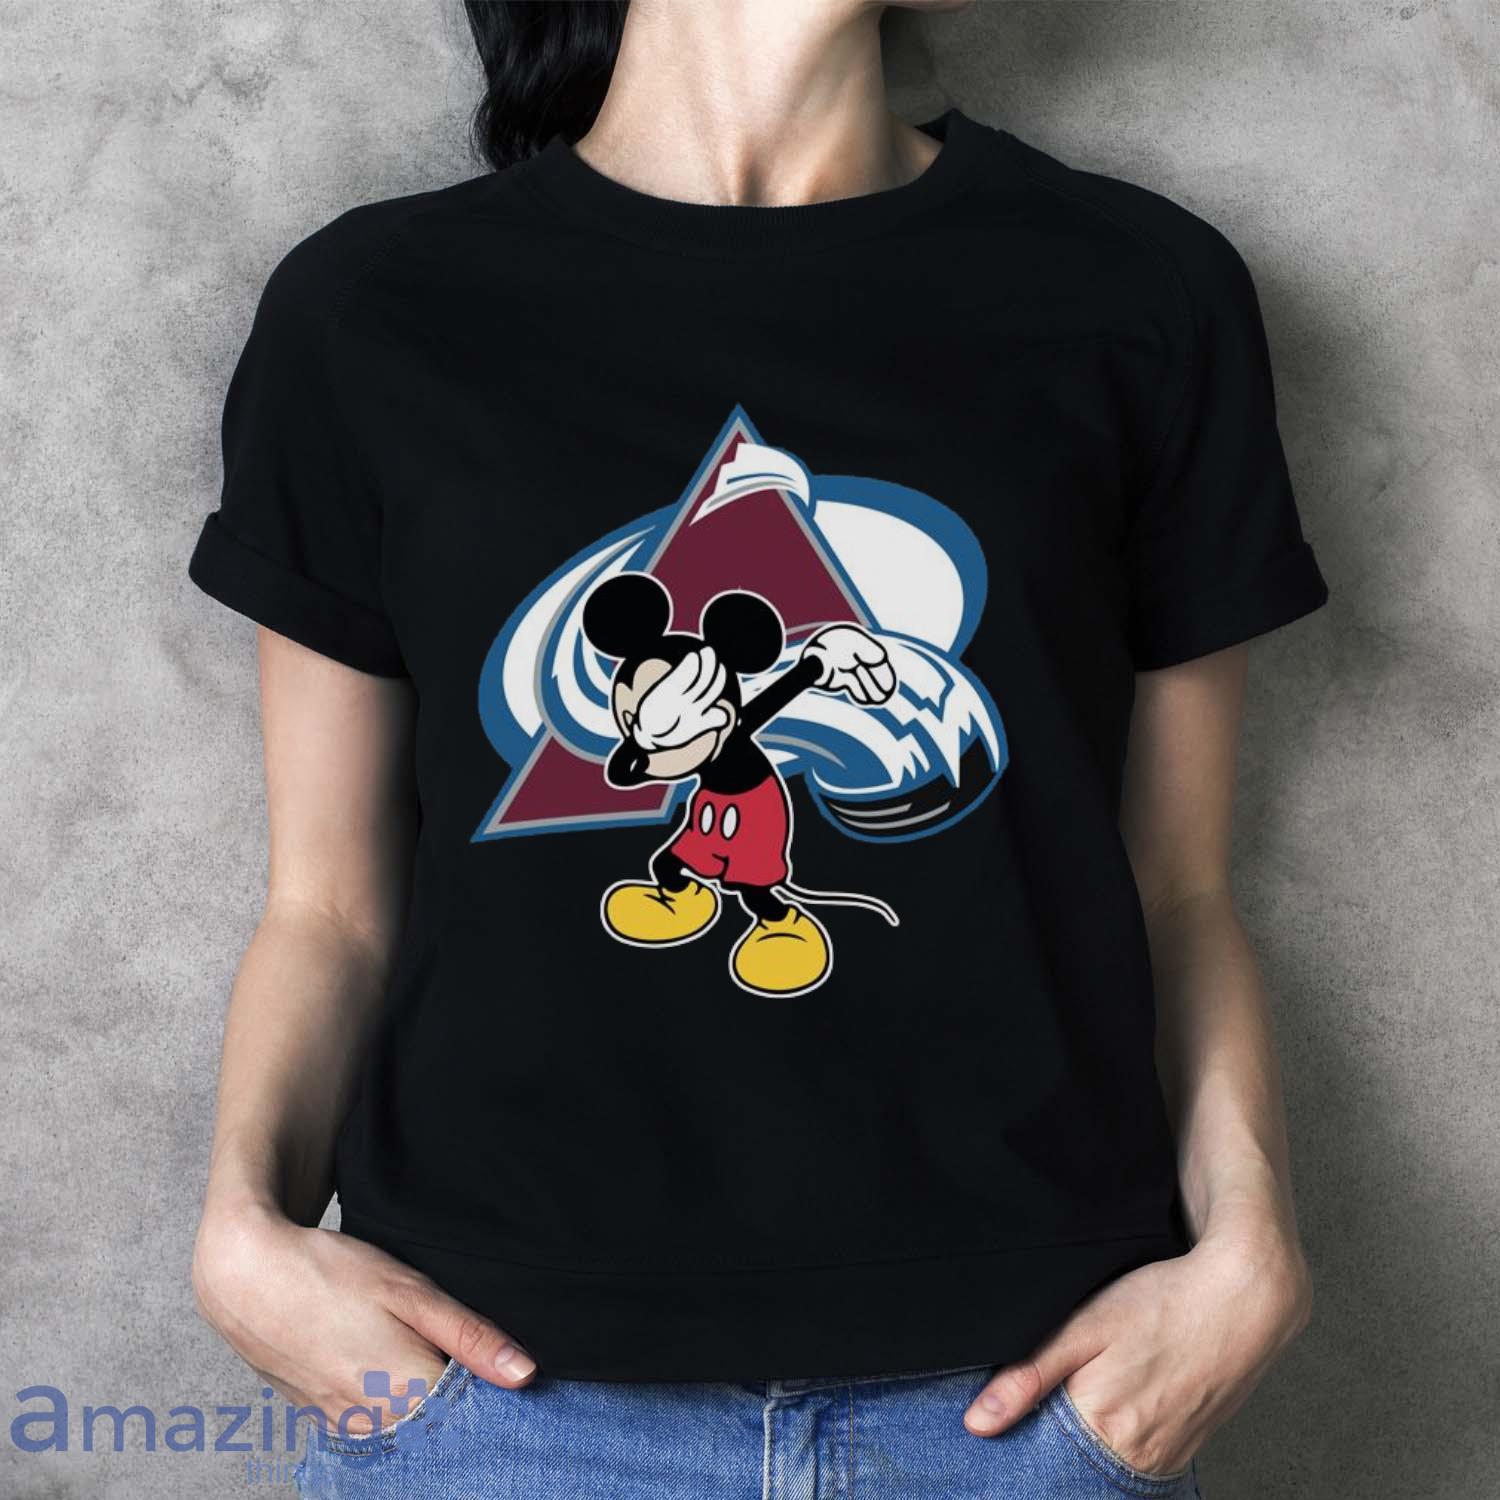 Colorado Avalanche T-shirt 3D cartoon graphic gift for fan